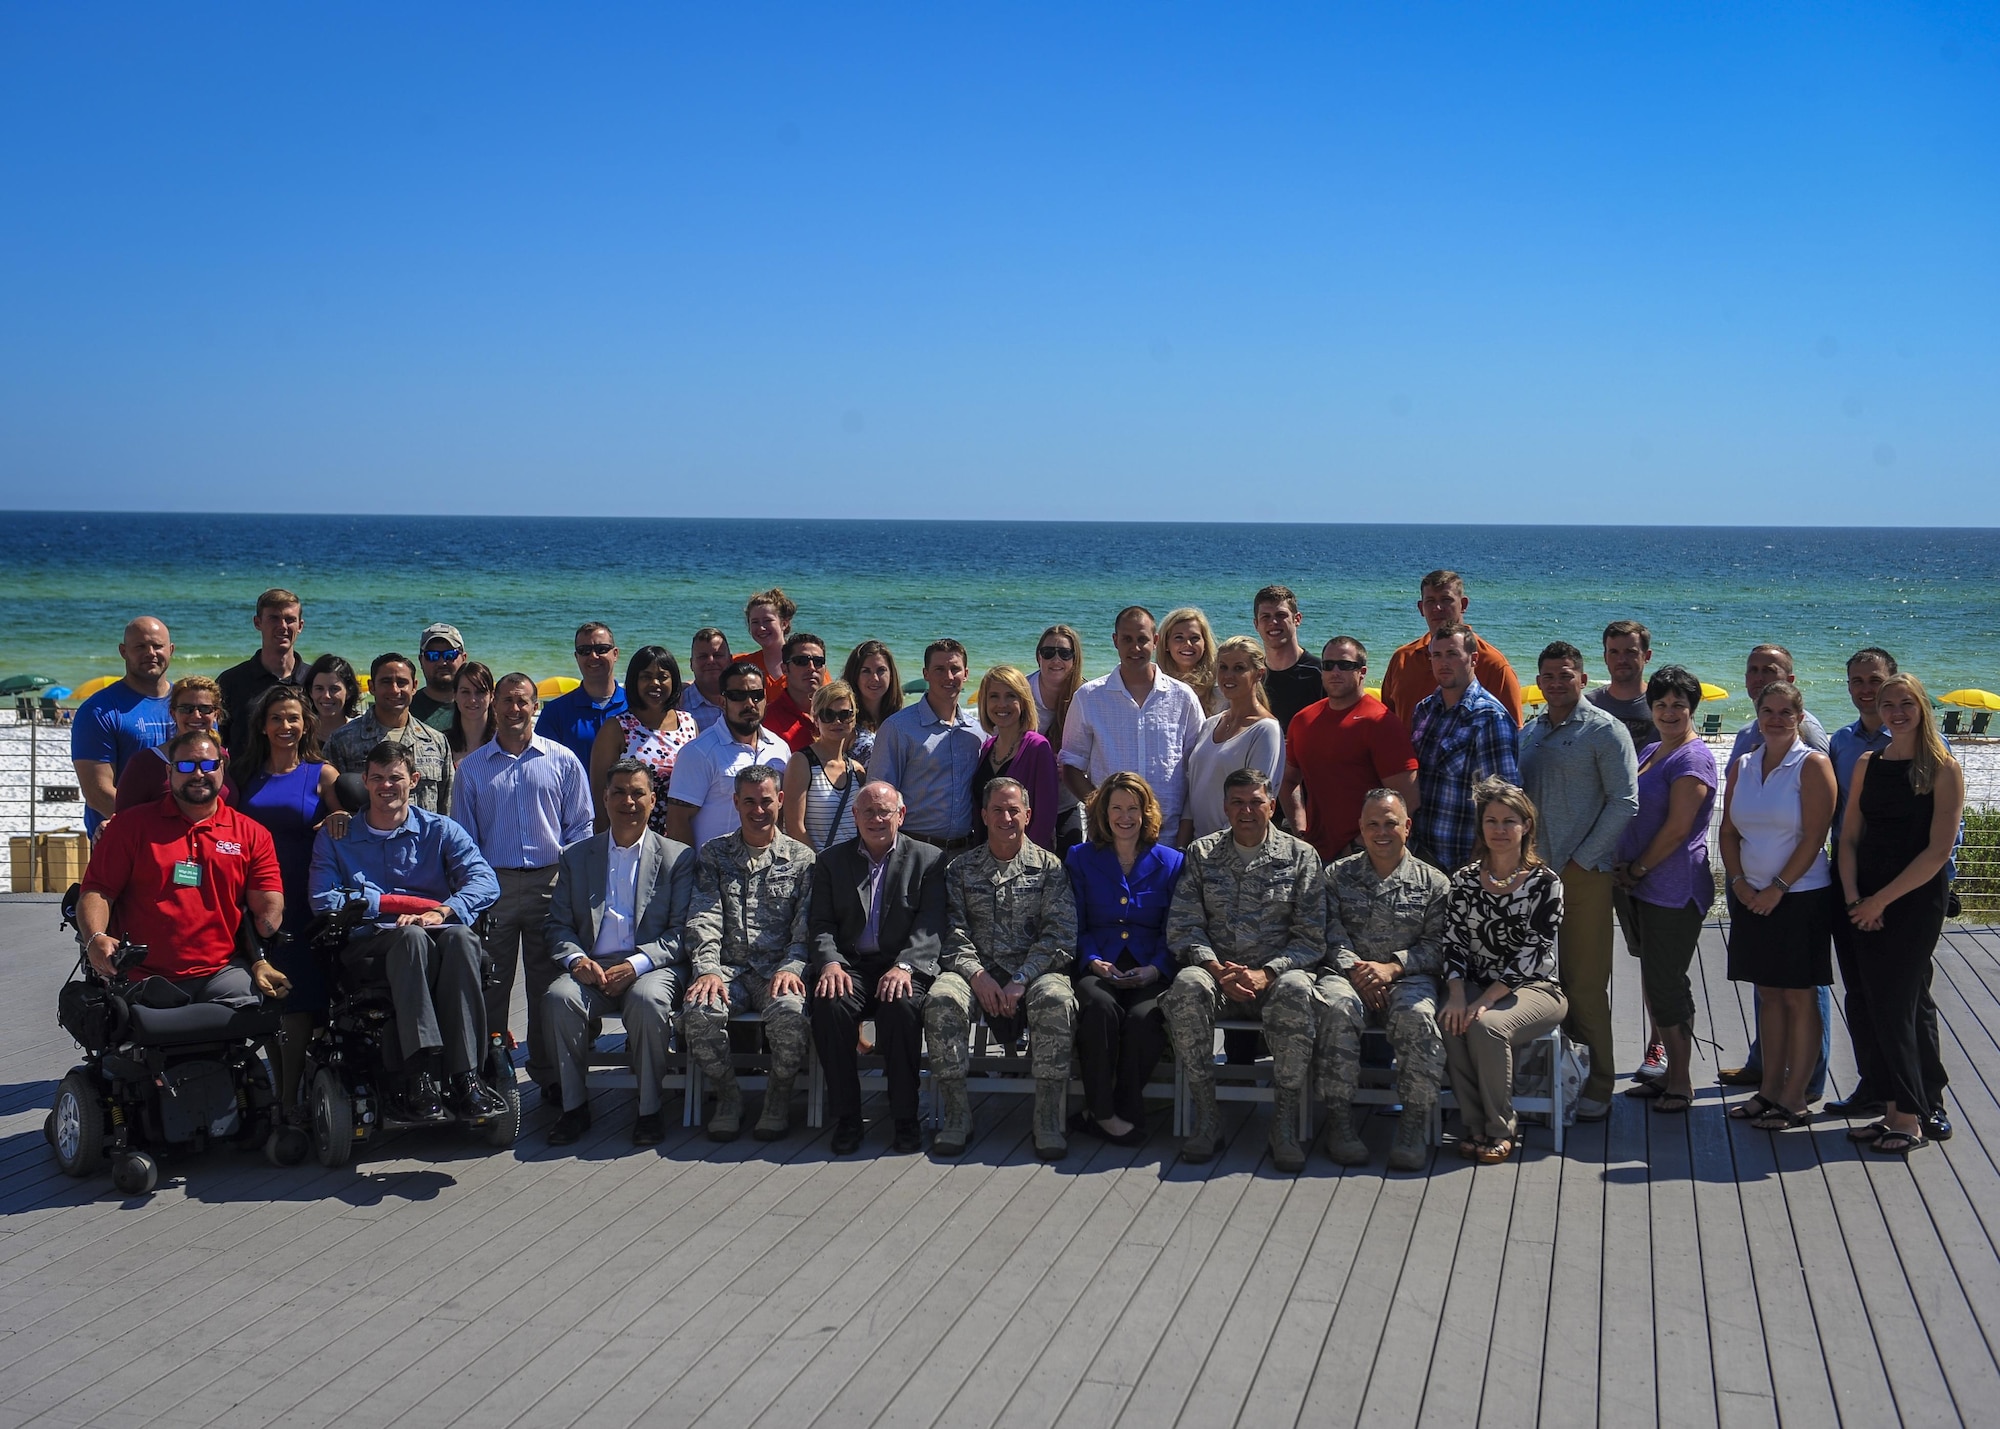 Attendees of the Air Force Special Operations Command Warrior C.A.R.E. Summit gather for a group photo with distinguished visitors at the Hilton Sandestin Beach Golf Resort & Spa April 26, 2016. The summit was designed to give wounded, injured and ill service members and caregivers an opportunity to discover available resources, network with helping agencies, develop mentor relationships and expand their life skills. (U.S. Air Force photo by Senior Airman Meagan Schutter) 